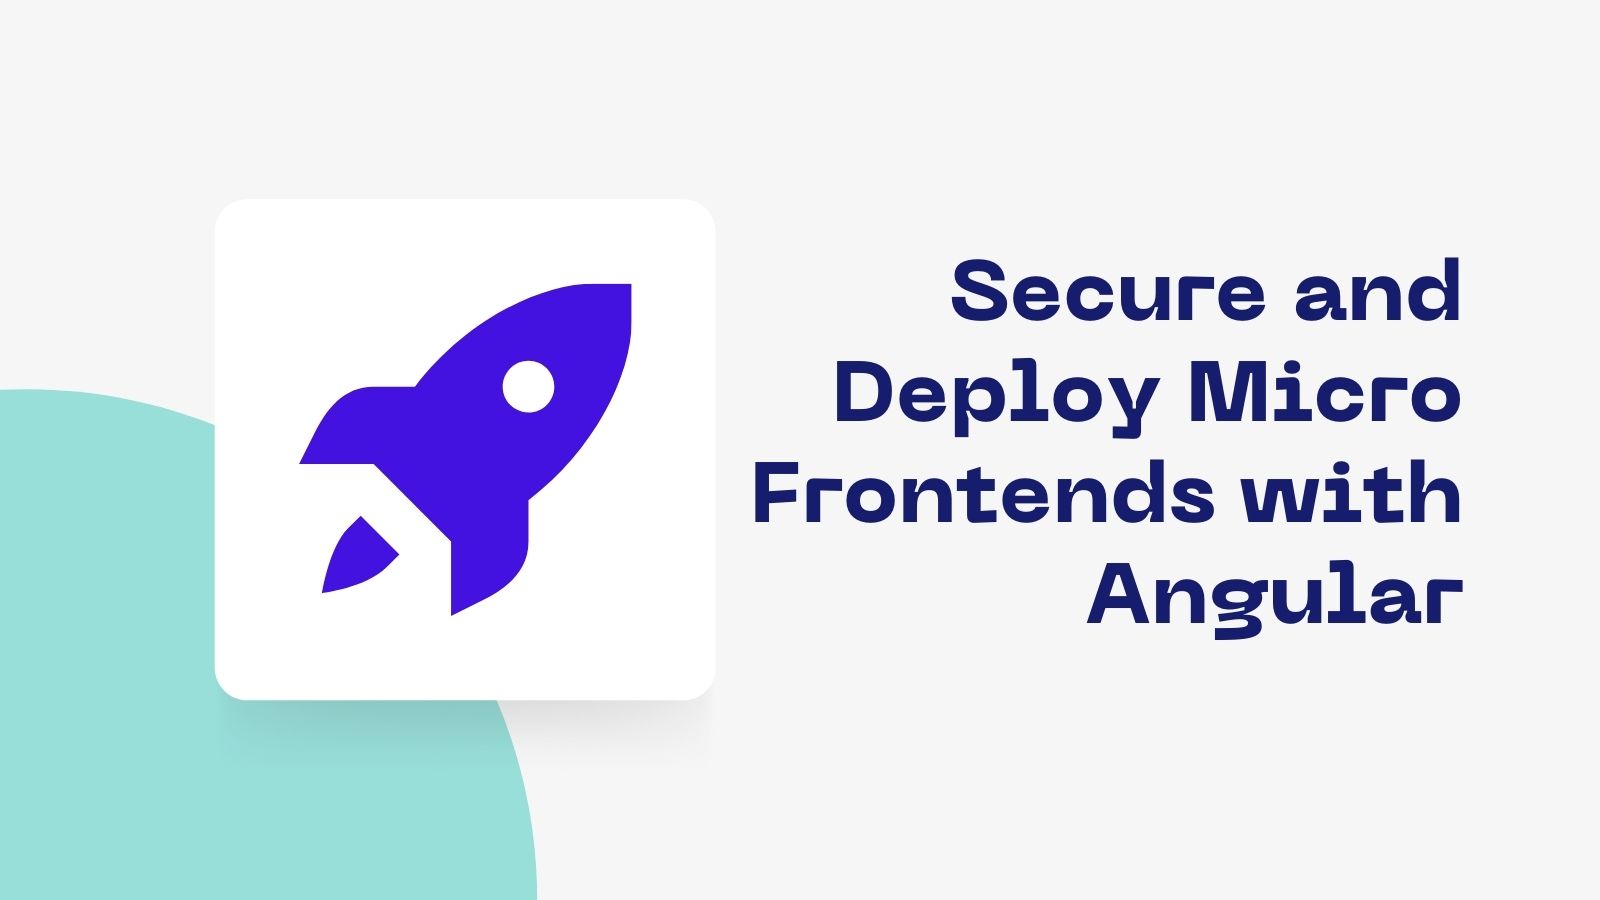 Secure and Deploy Micro Frontends with Angular